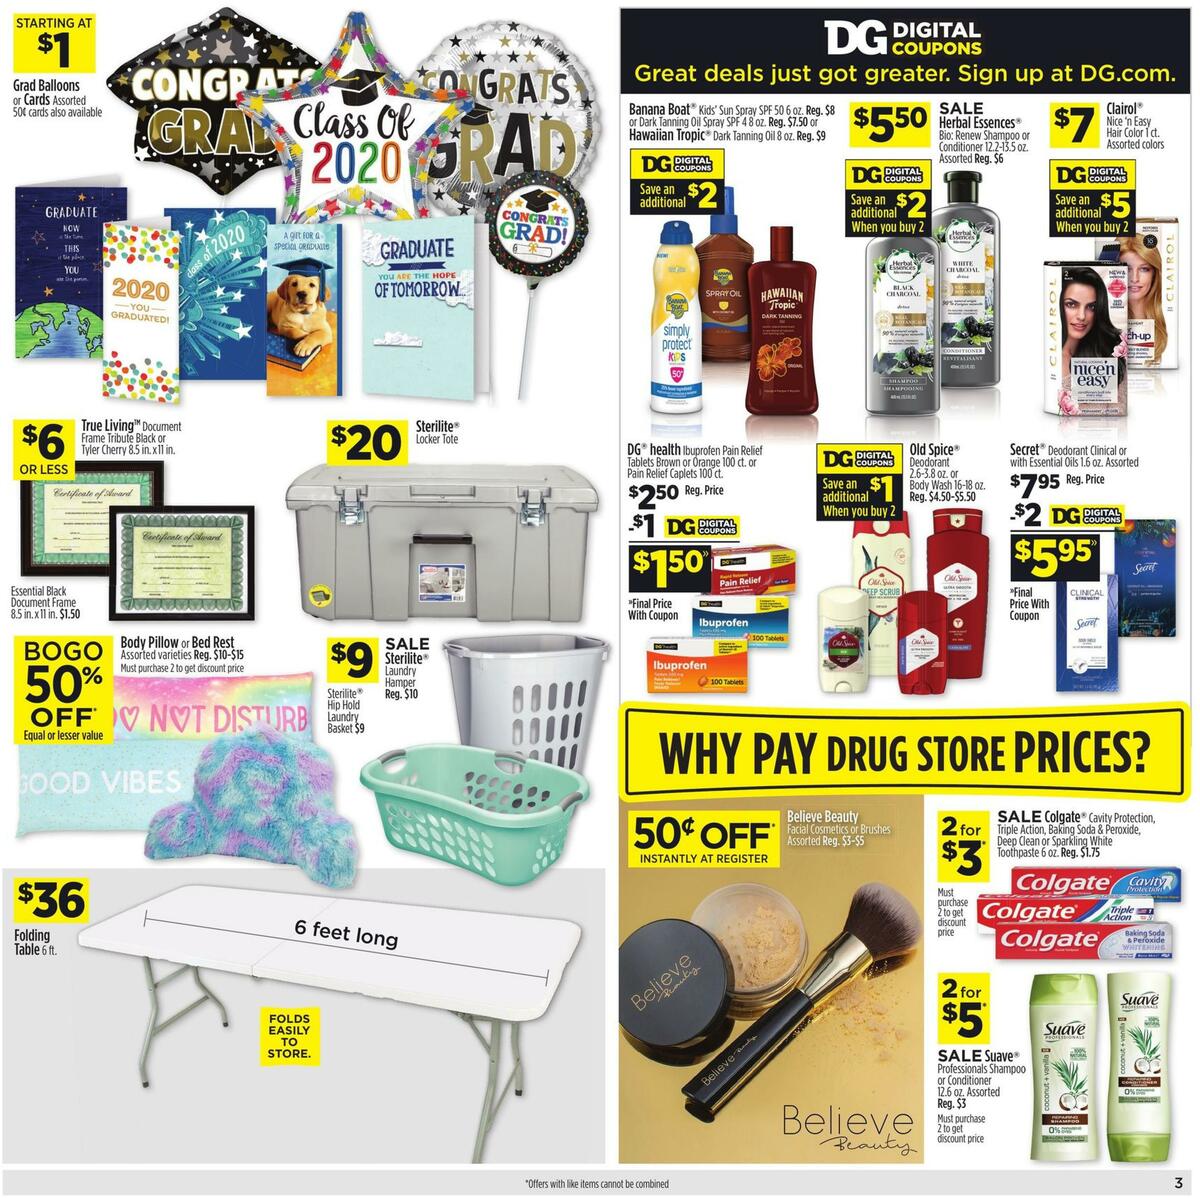 Dollar General Weekly Ad from May 31